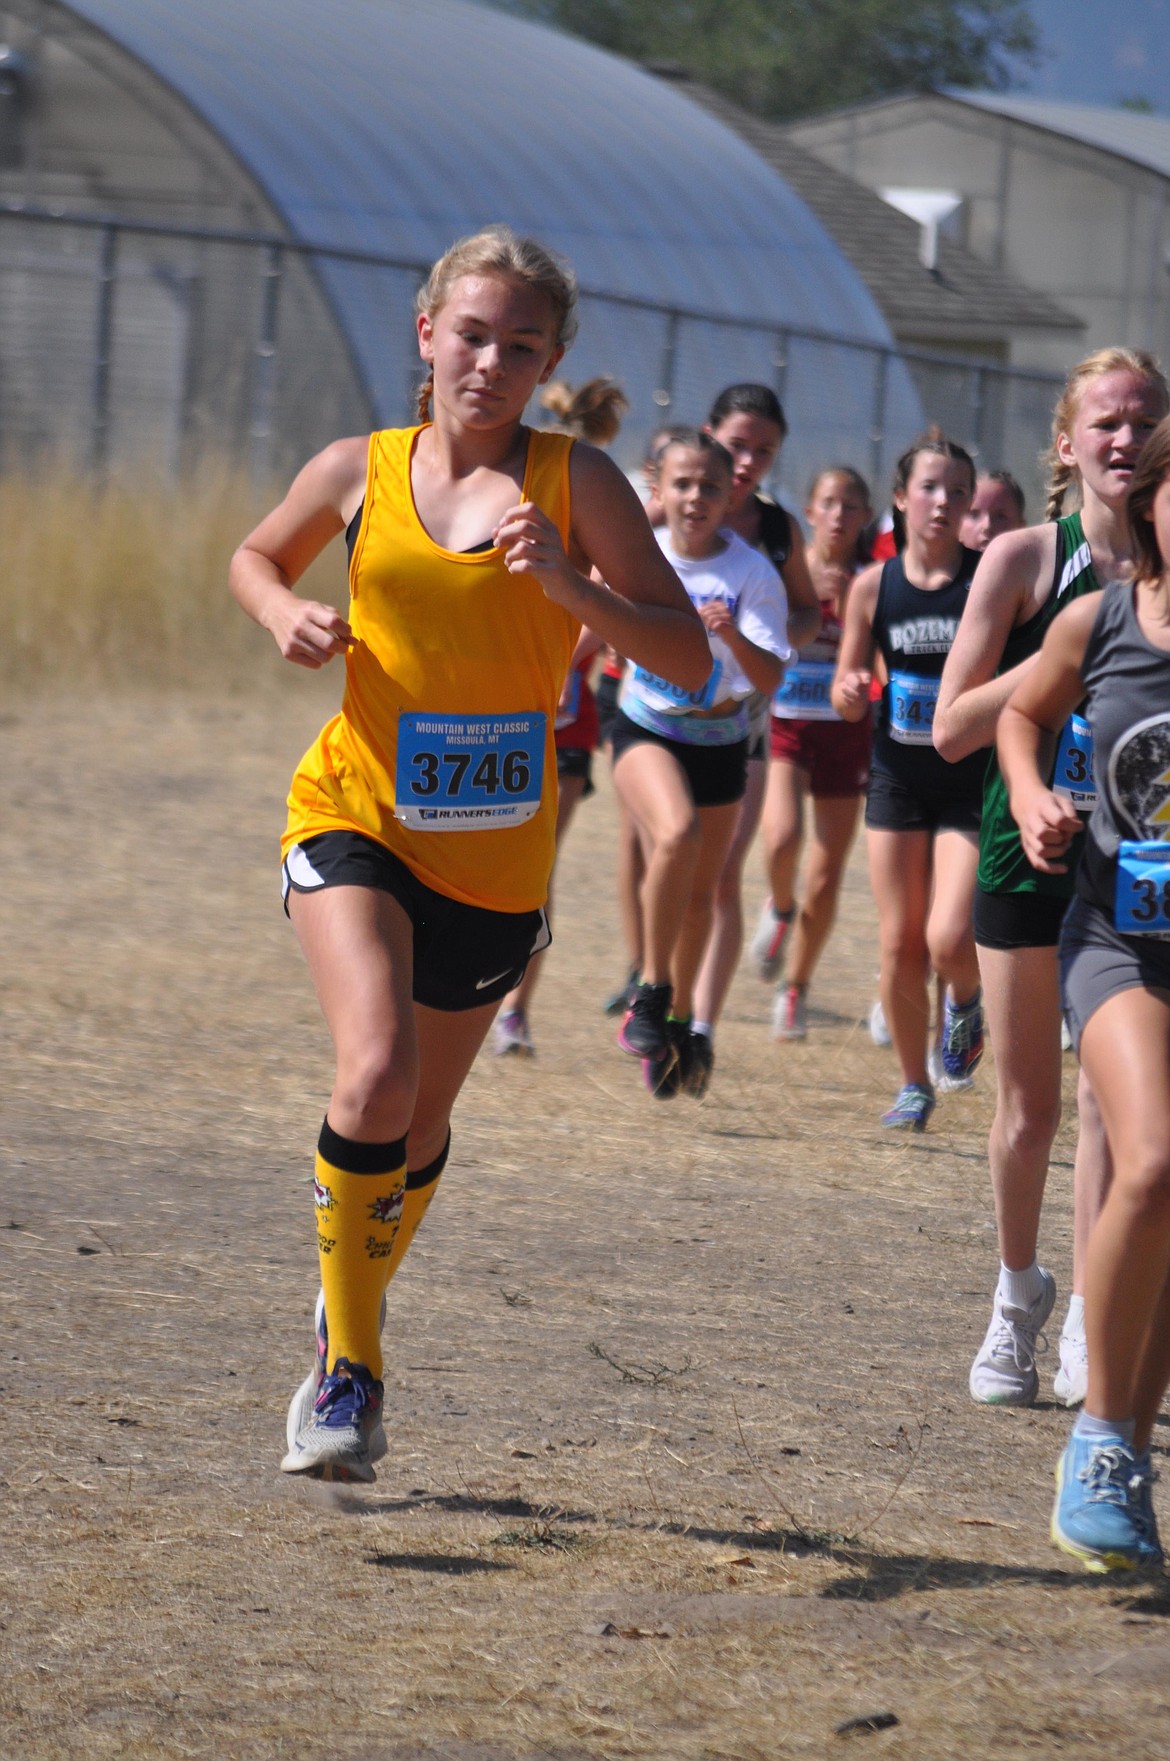 Thompson Falls runner Lexy Franck runs in the Mountain West Classic cross country meet this past Saturday in Missoula. (Photo by Sarah Naegeli)